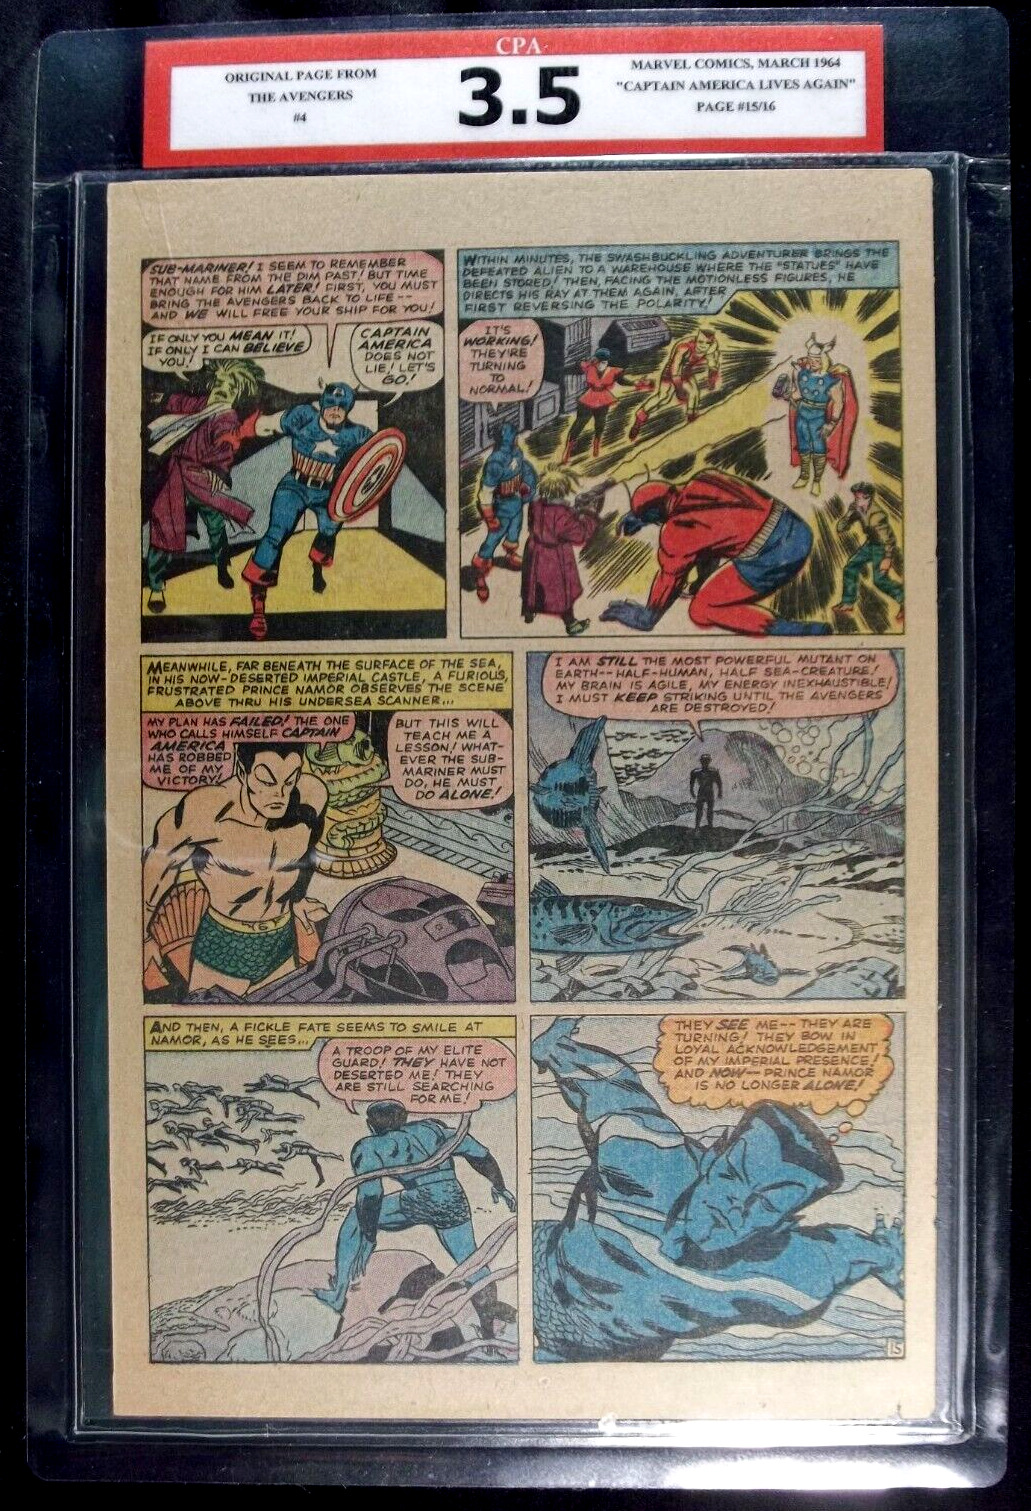 The Avengers #4 CPA 3.5 SINGLE PAGE #15/16 1st Silver Age App of Captain America